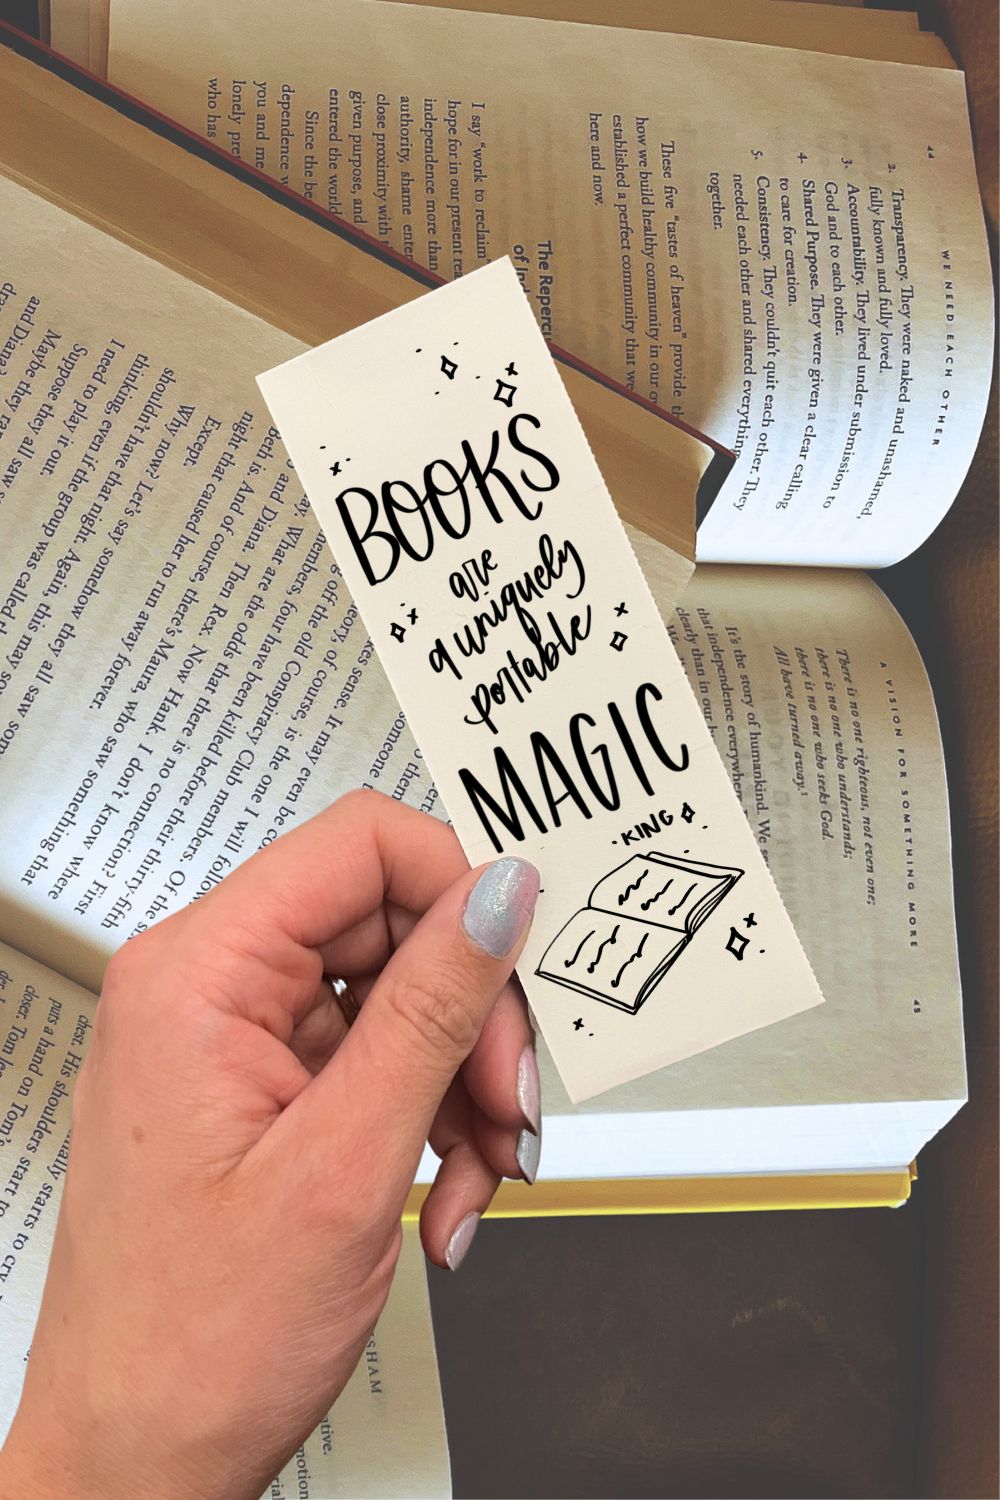 Free printable bookmarks with quotes about reading. The one being held reads: Books are a uniquely portable magic.